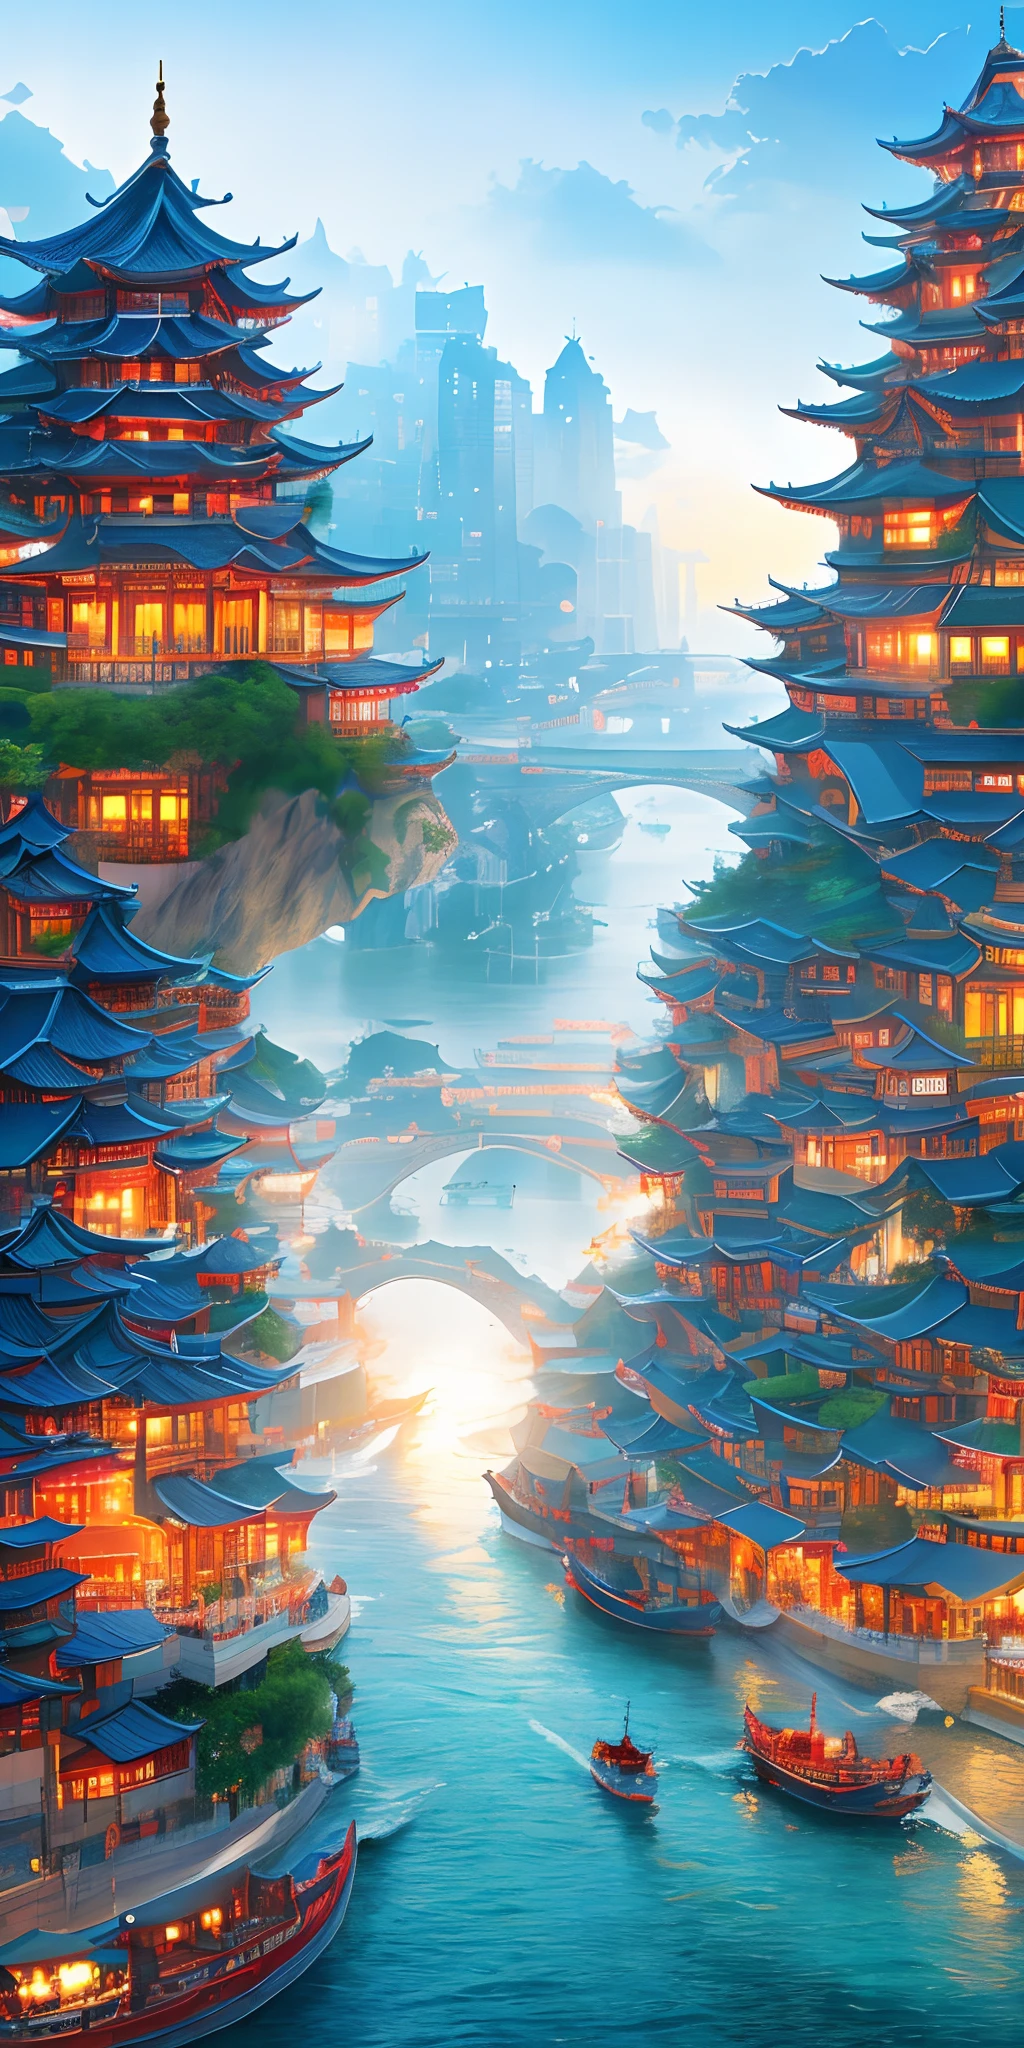 Along the River During Qingming Festival，horizontal layout, high resolution, best quality, ultra-detailed, dynamic angle, floating, bustling cityscape, intricate details, historical architecture, flowing river, vivid colors, volumetric lighting, crowded boats and bridges, rich cultural background.